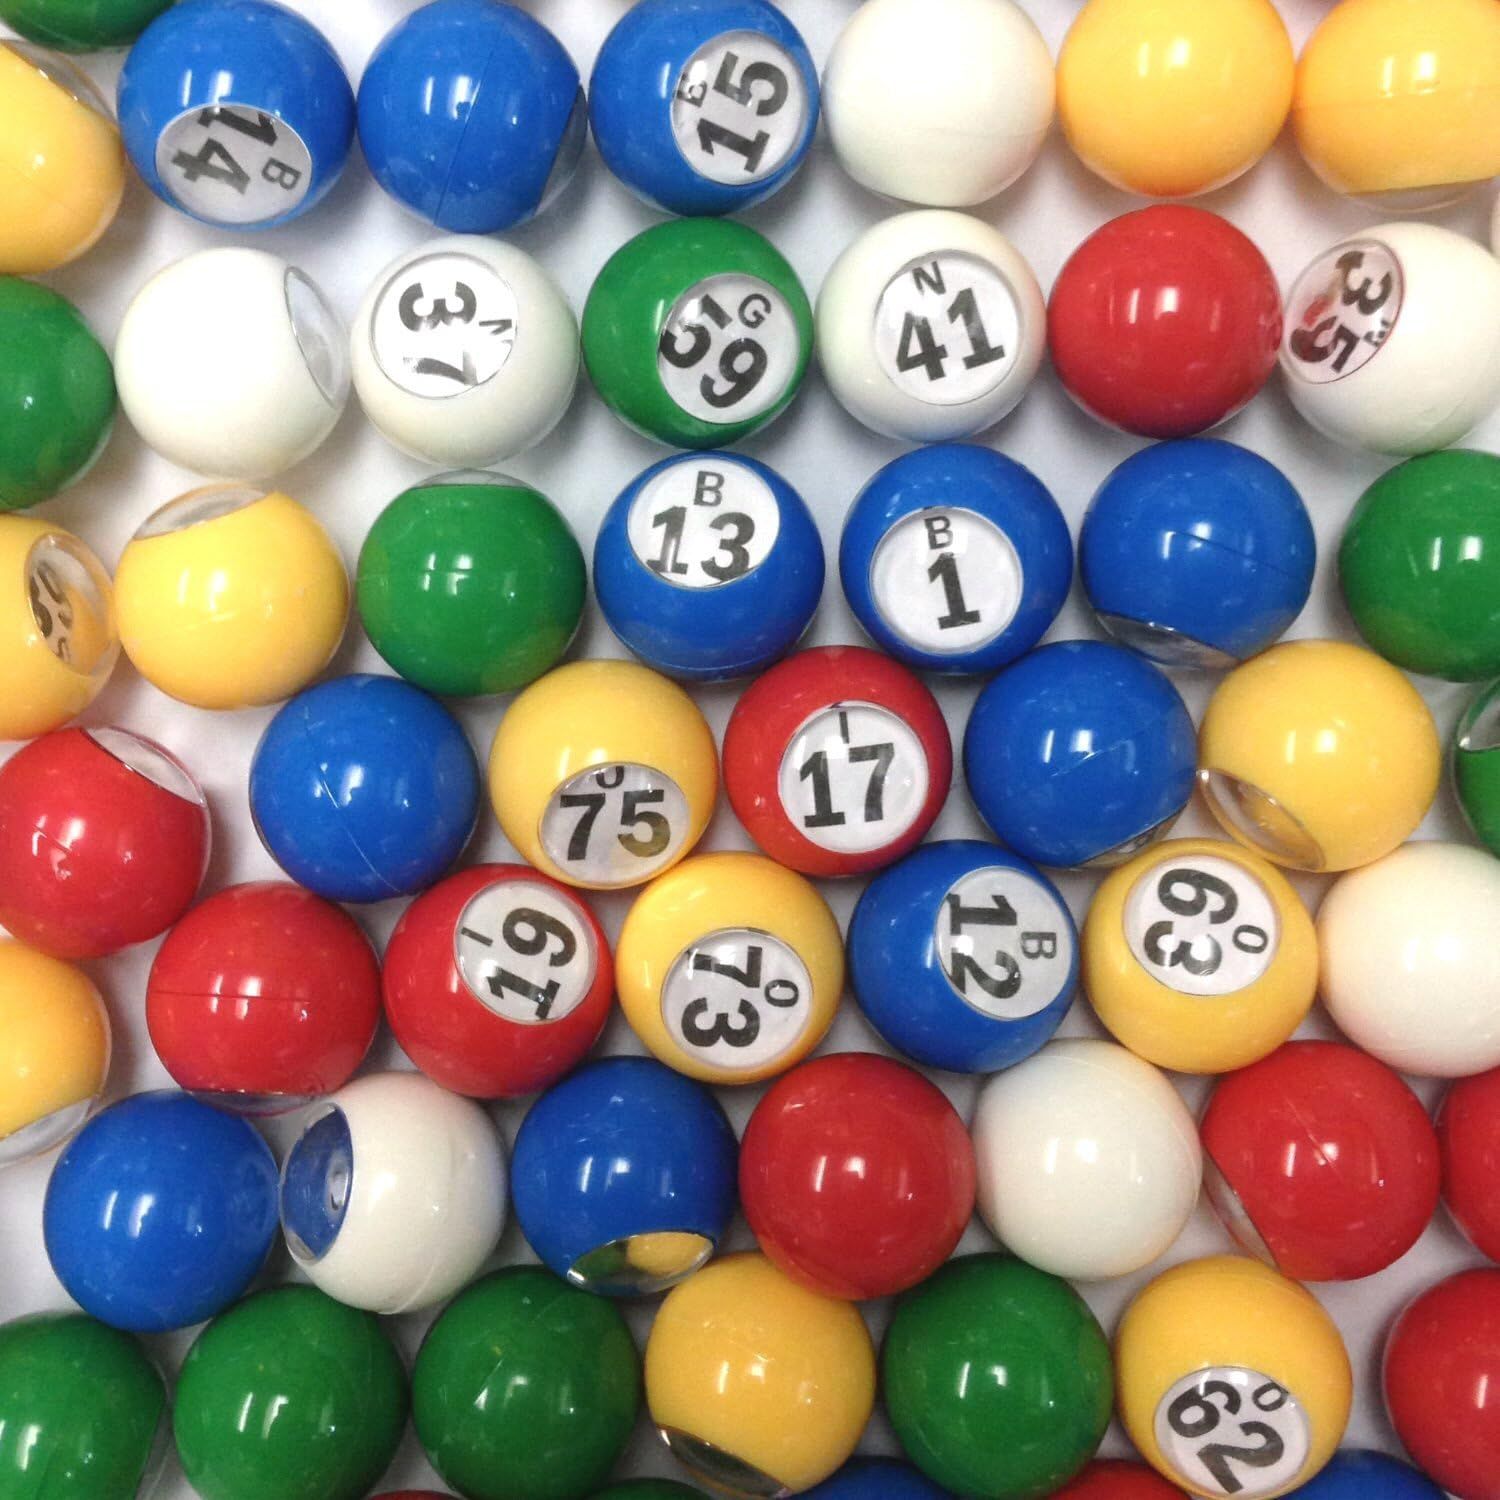 5 Best Bingo Balls Products for Your Gaming Fun